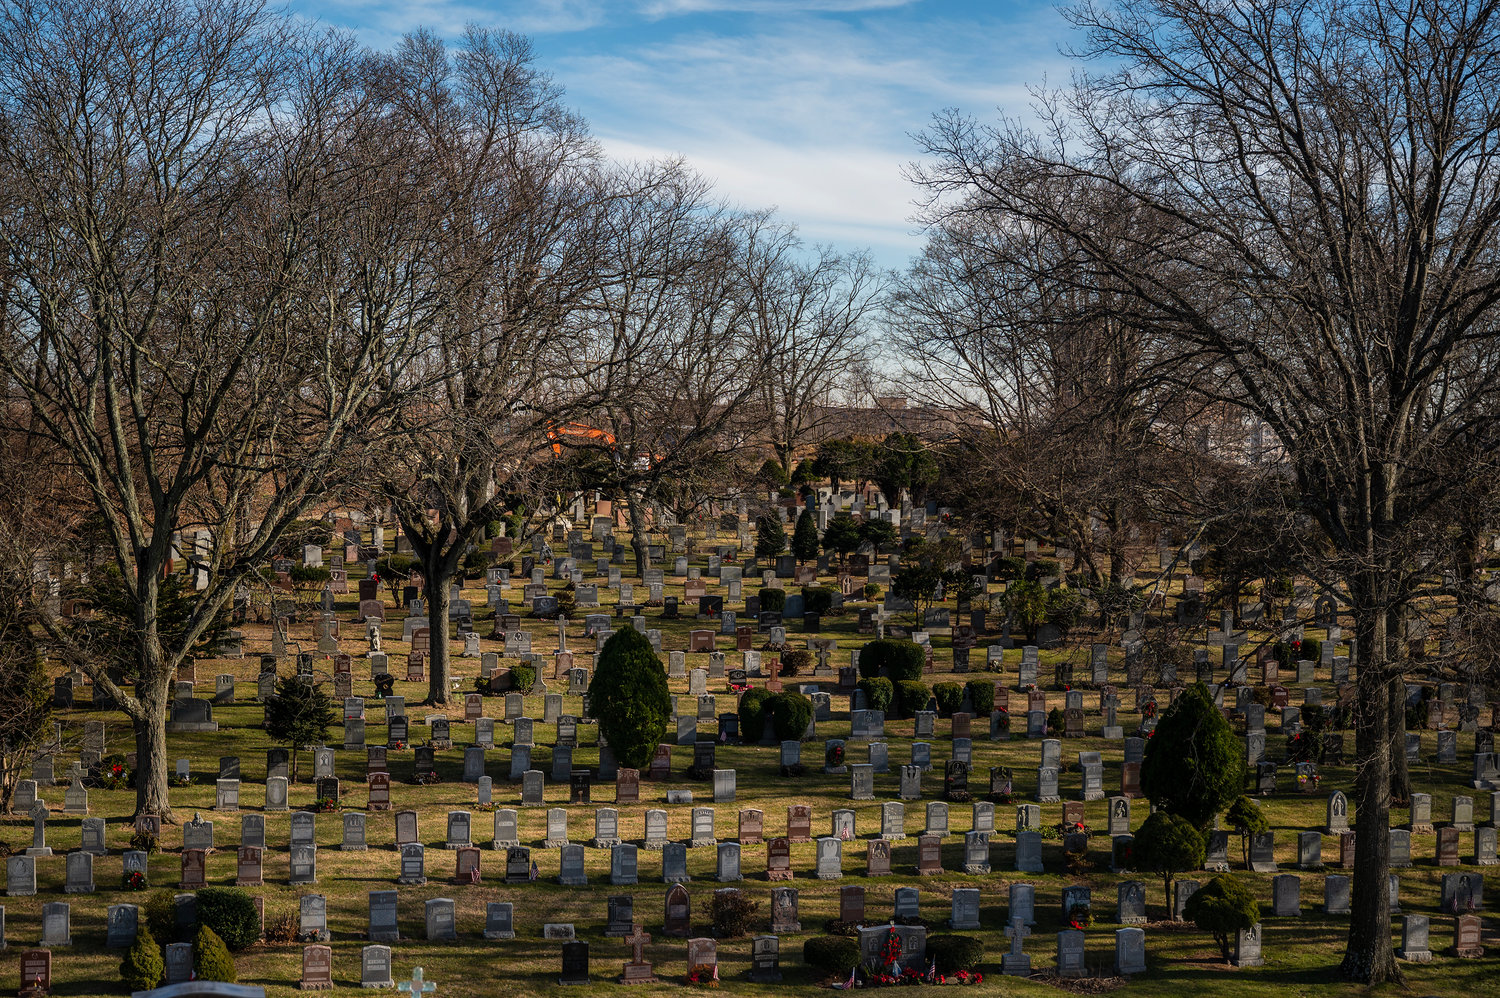 Woodlawn Cemetery on Monday, February 13, 2023.